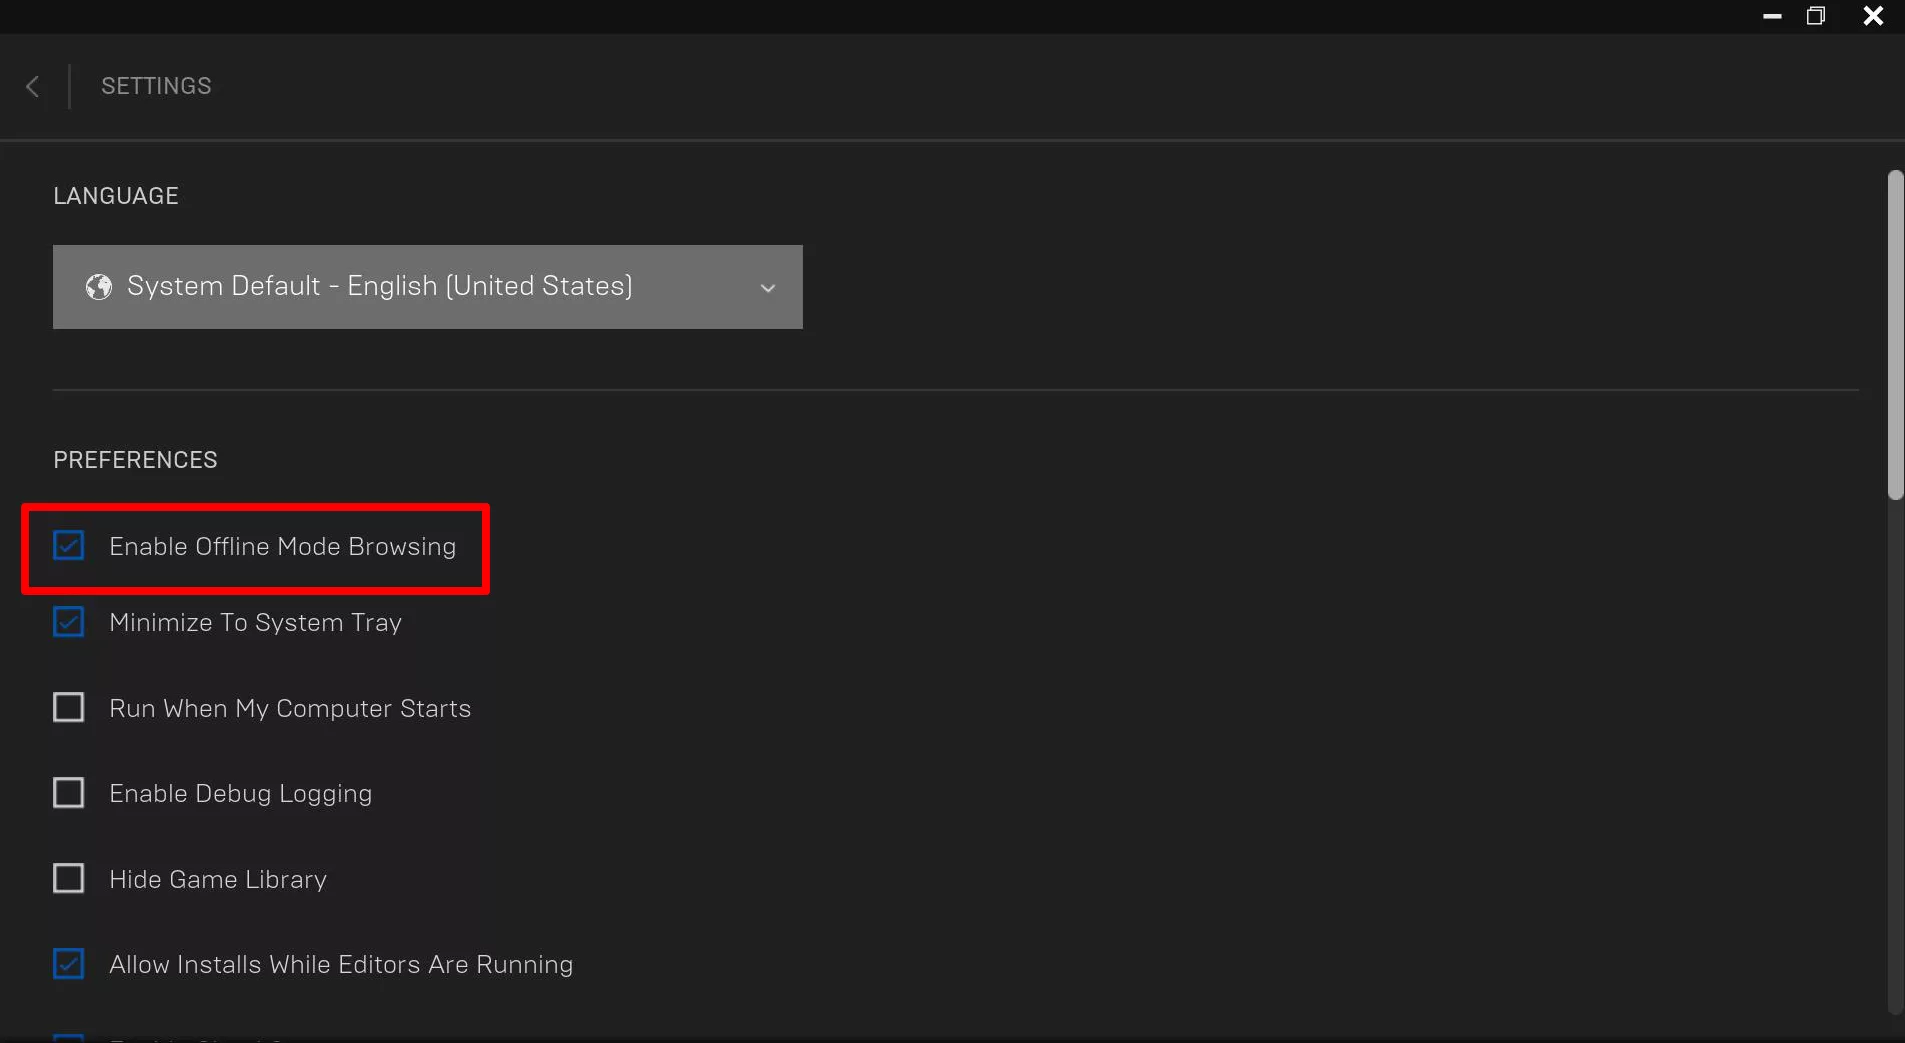 A screenshot of the Epic Games Launcher settings with the Offline Mode option highlighted.